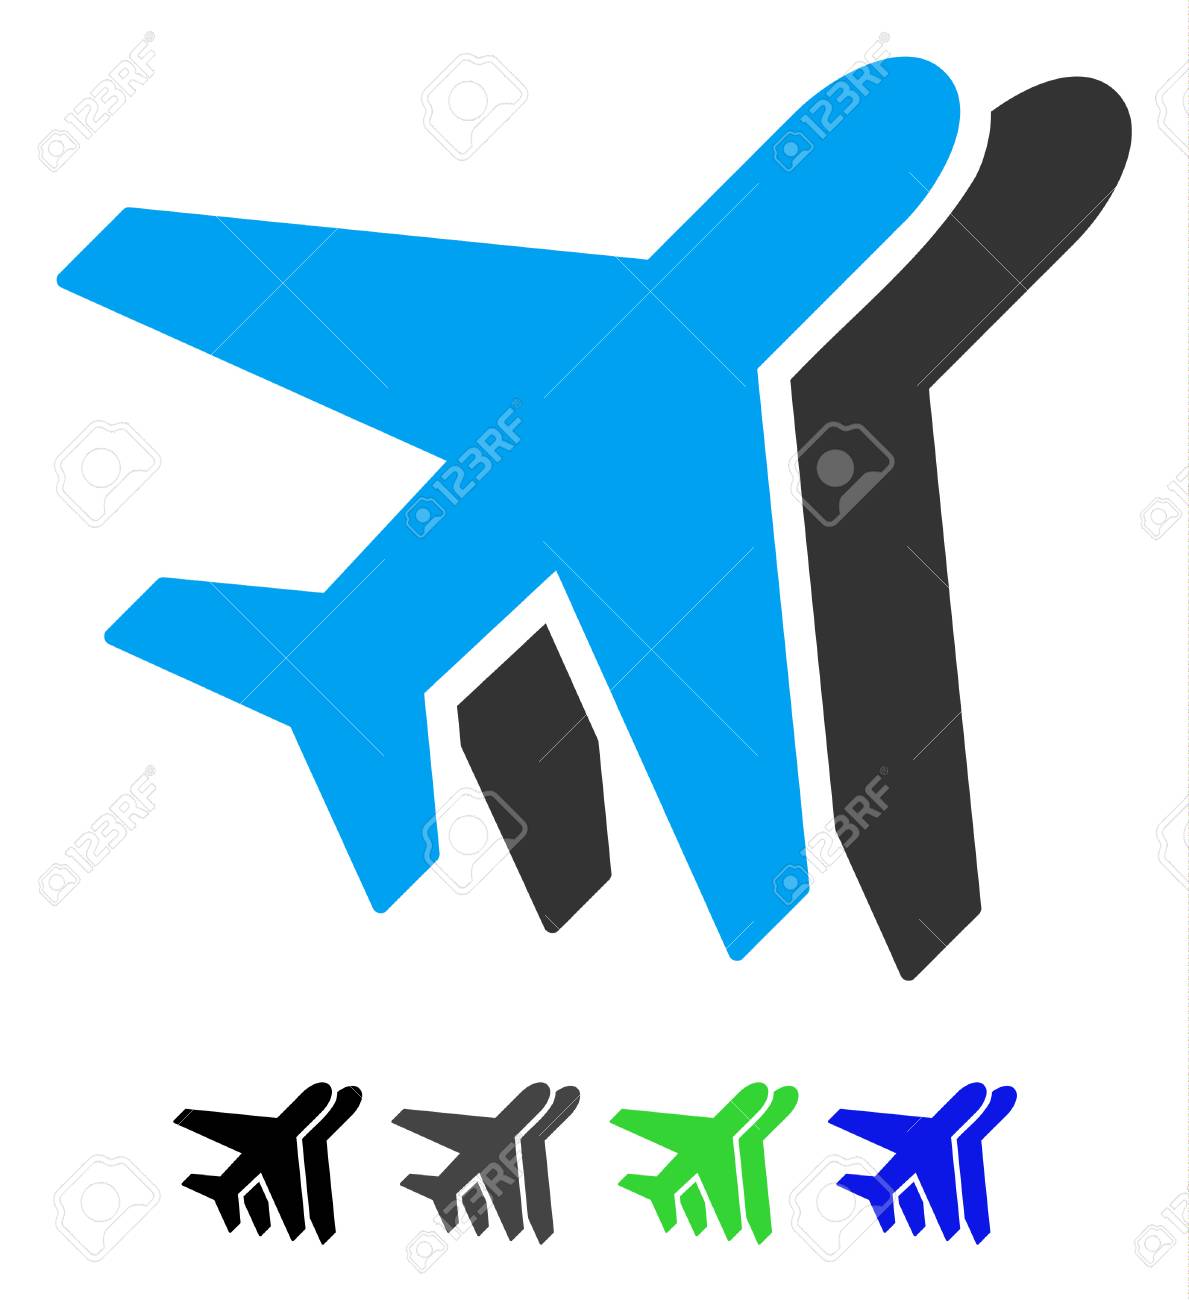 Airlines Icon with Dating Bonus  Stock Vector  ahasoft #146044711